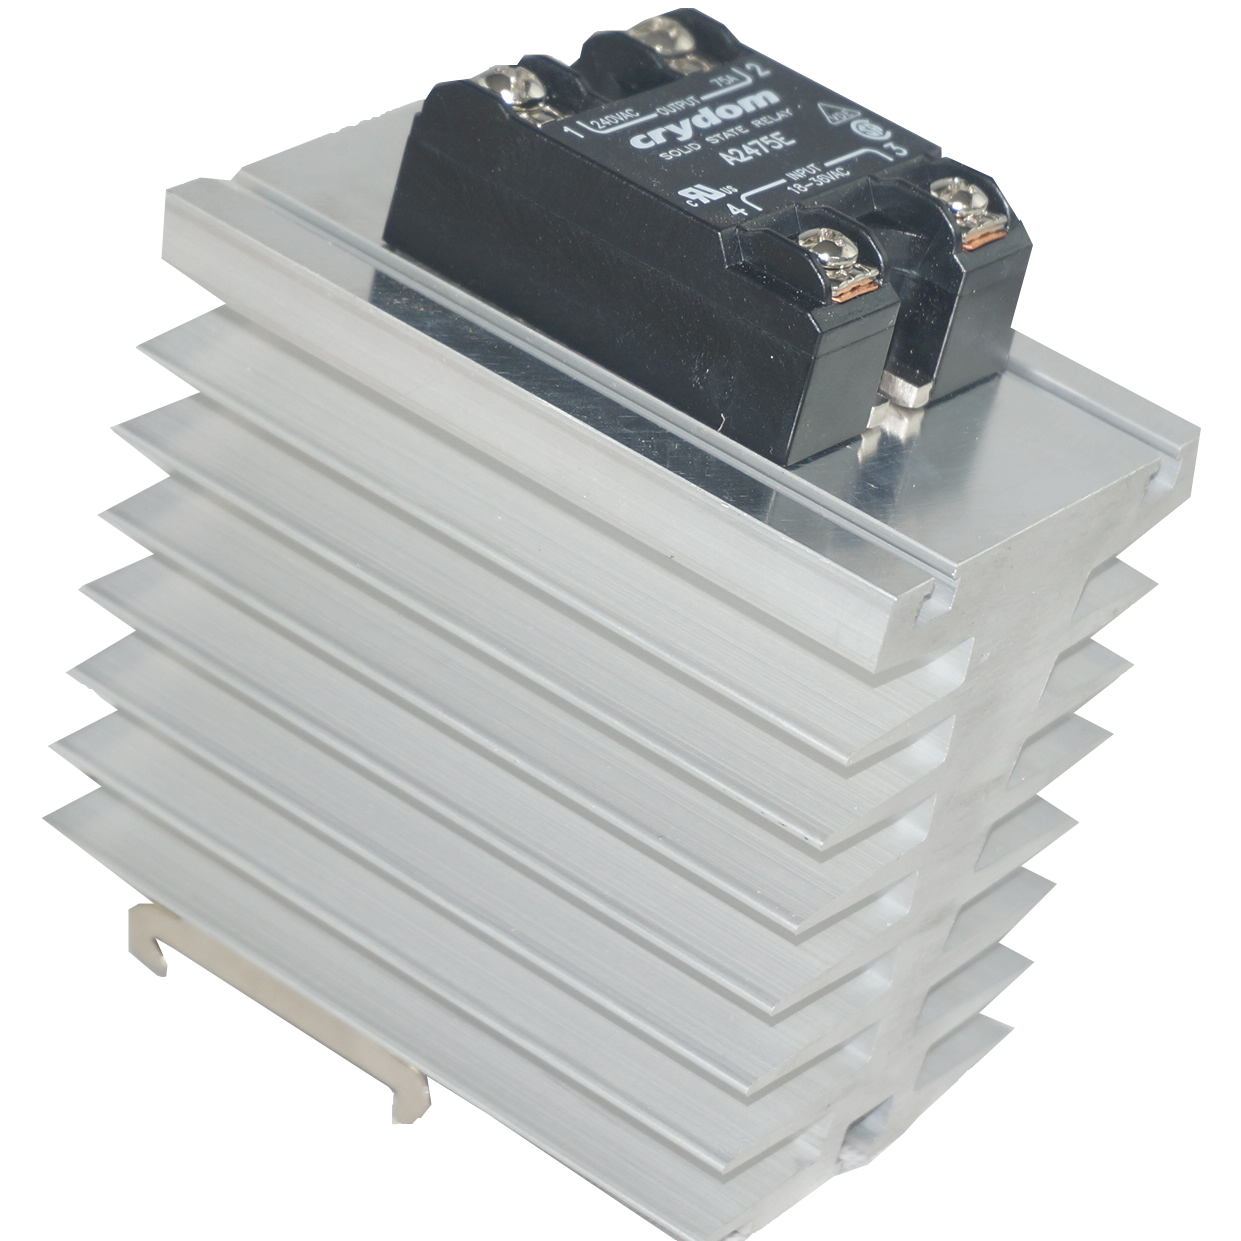 GFIN/100M-DR + A2450EG, Din Rail Mount Solid State Relay with Heatsink, 24VAC Control Input, 24-280VAC Output, 34 Amps @ 40 Deg C ambient, LED Indicator